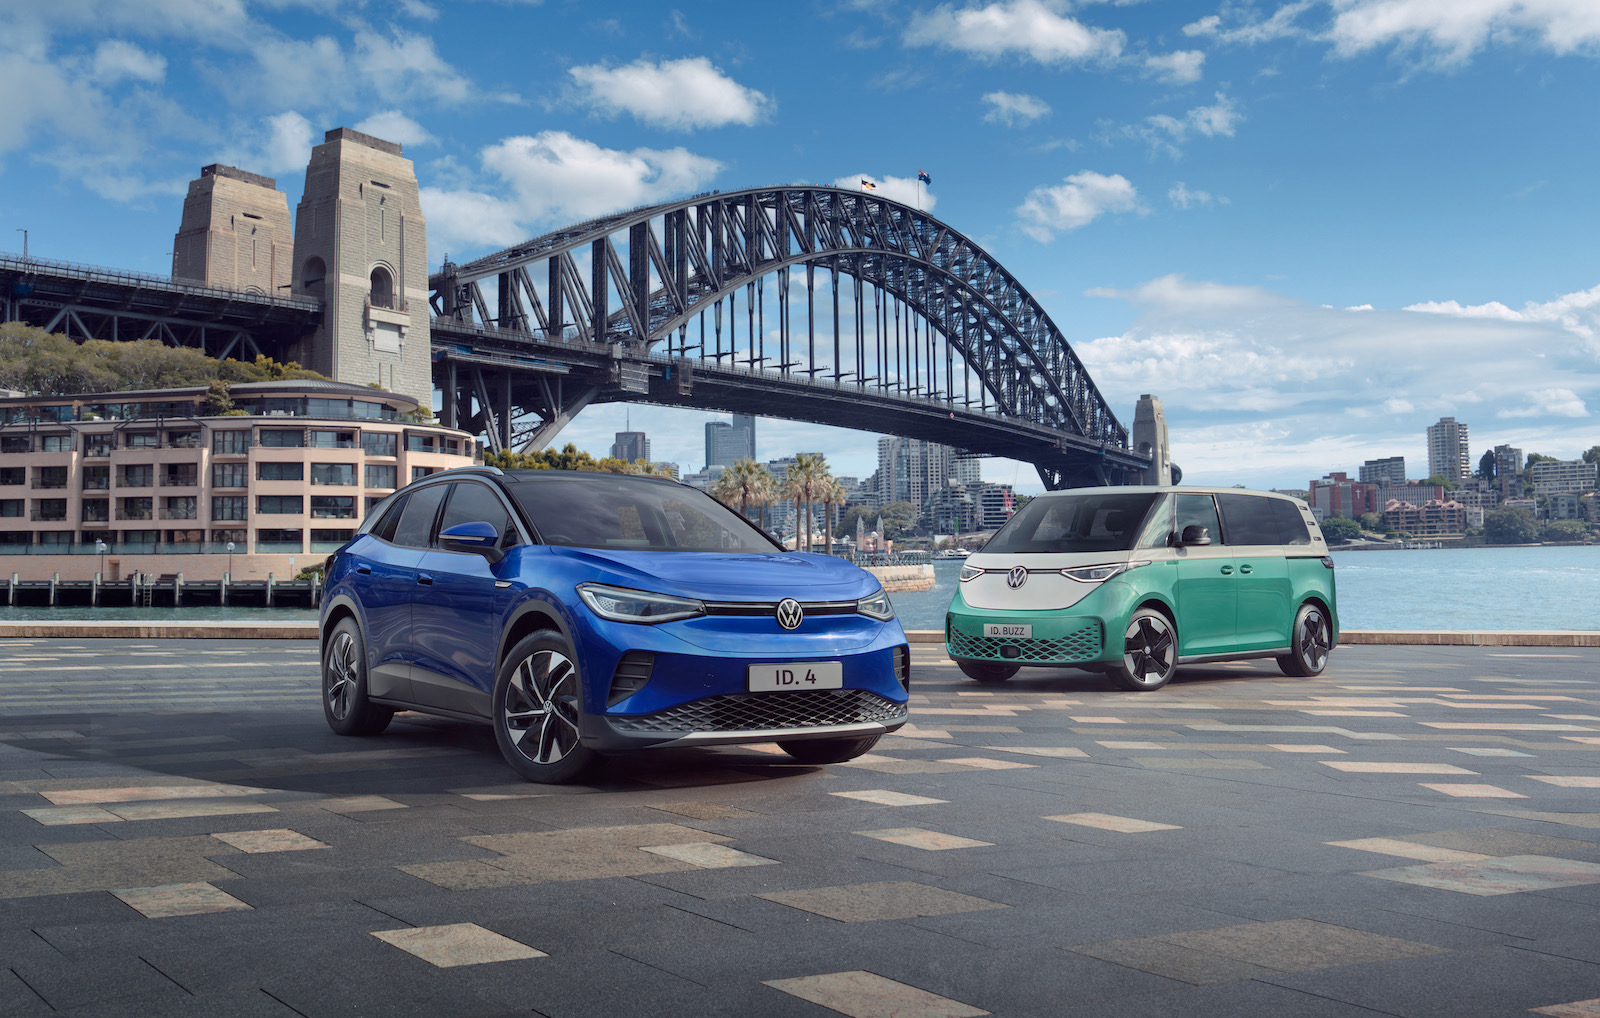 Volkswagen confirms 5 EVs headed for Australia by 2025